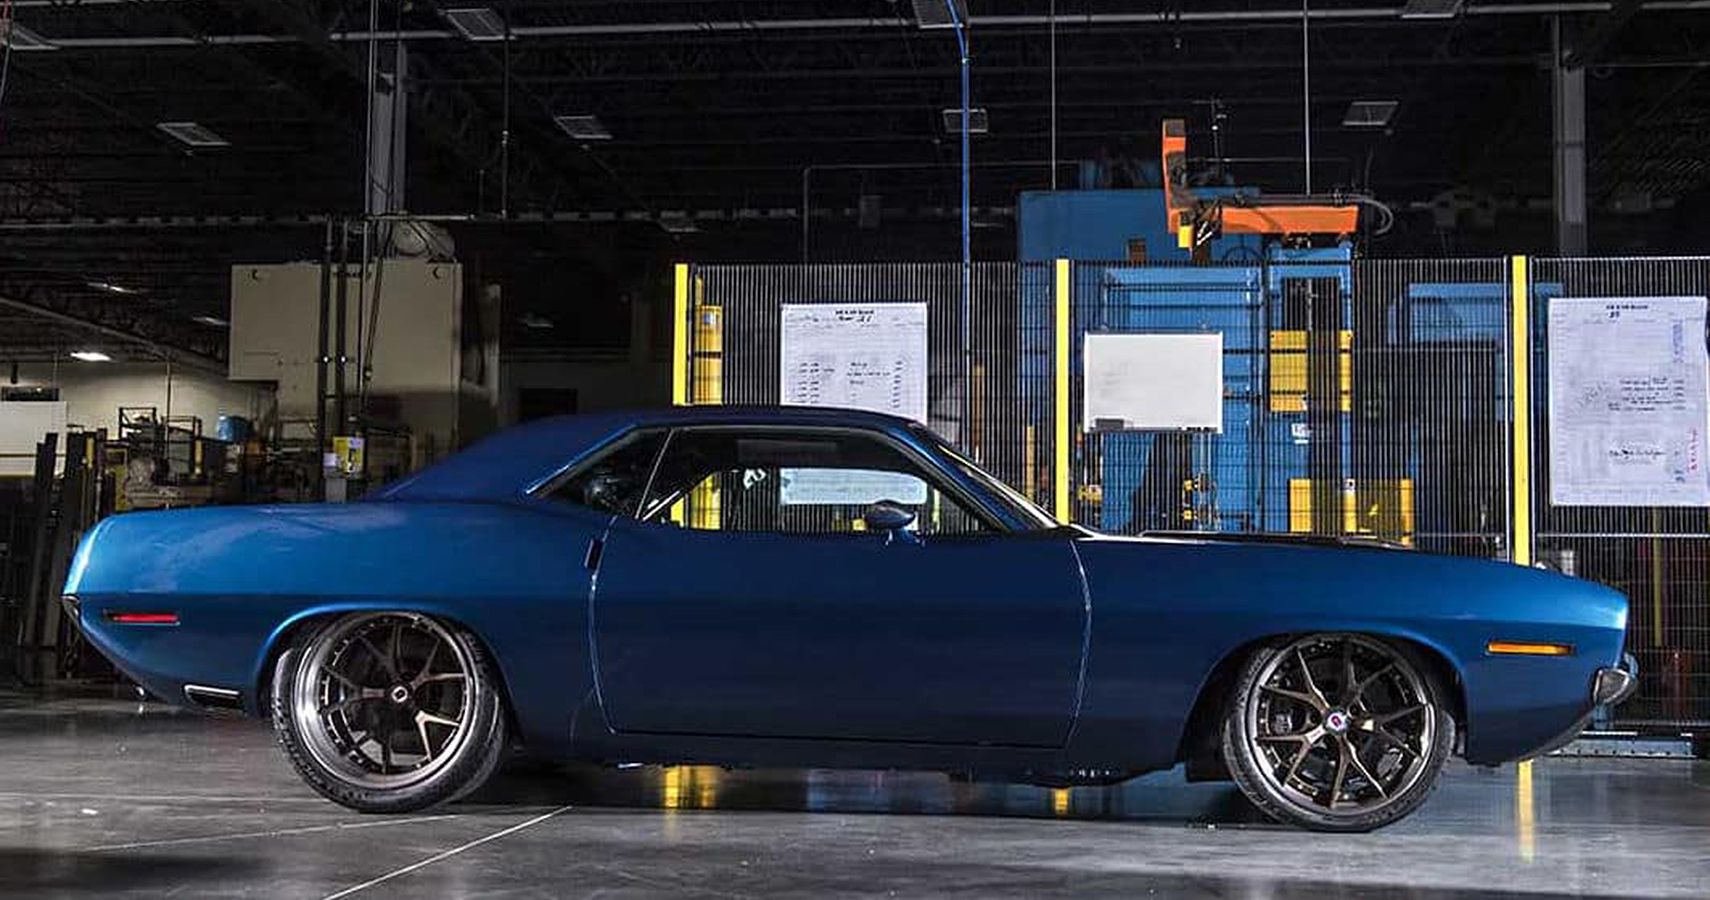 Kevin Hart’s ’70 Barracuda Looks Beautiful Enough To Make Grown Men Cry Real Tears Of Envious Pain